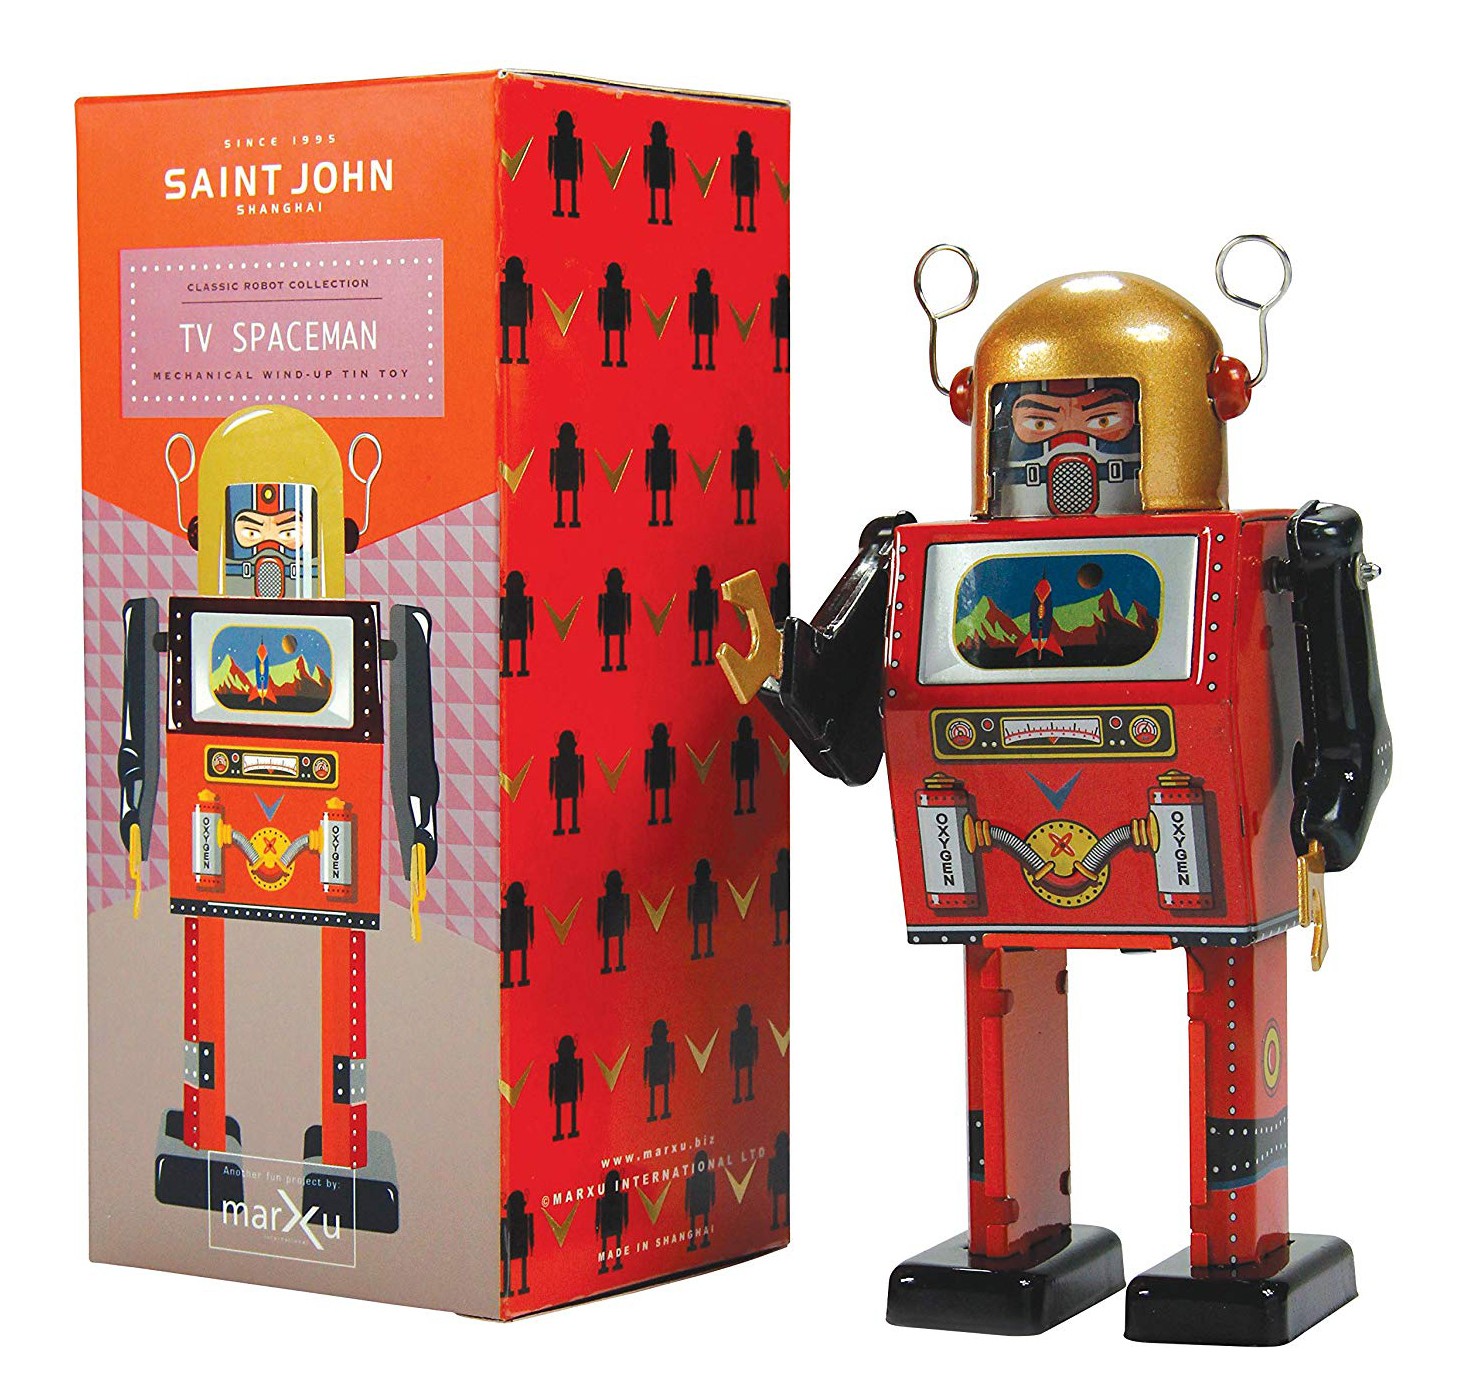 New Tin Wind Up Robot Retro Vintage Toy Mechanical Robot Spaceman Collection 